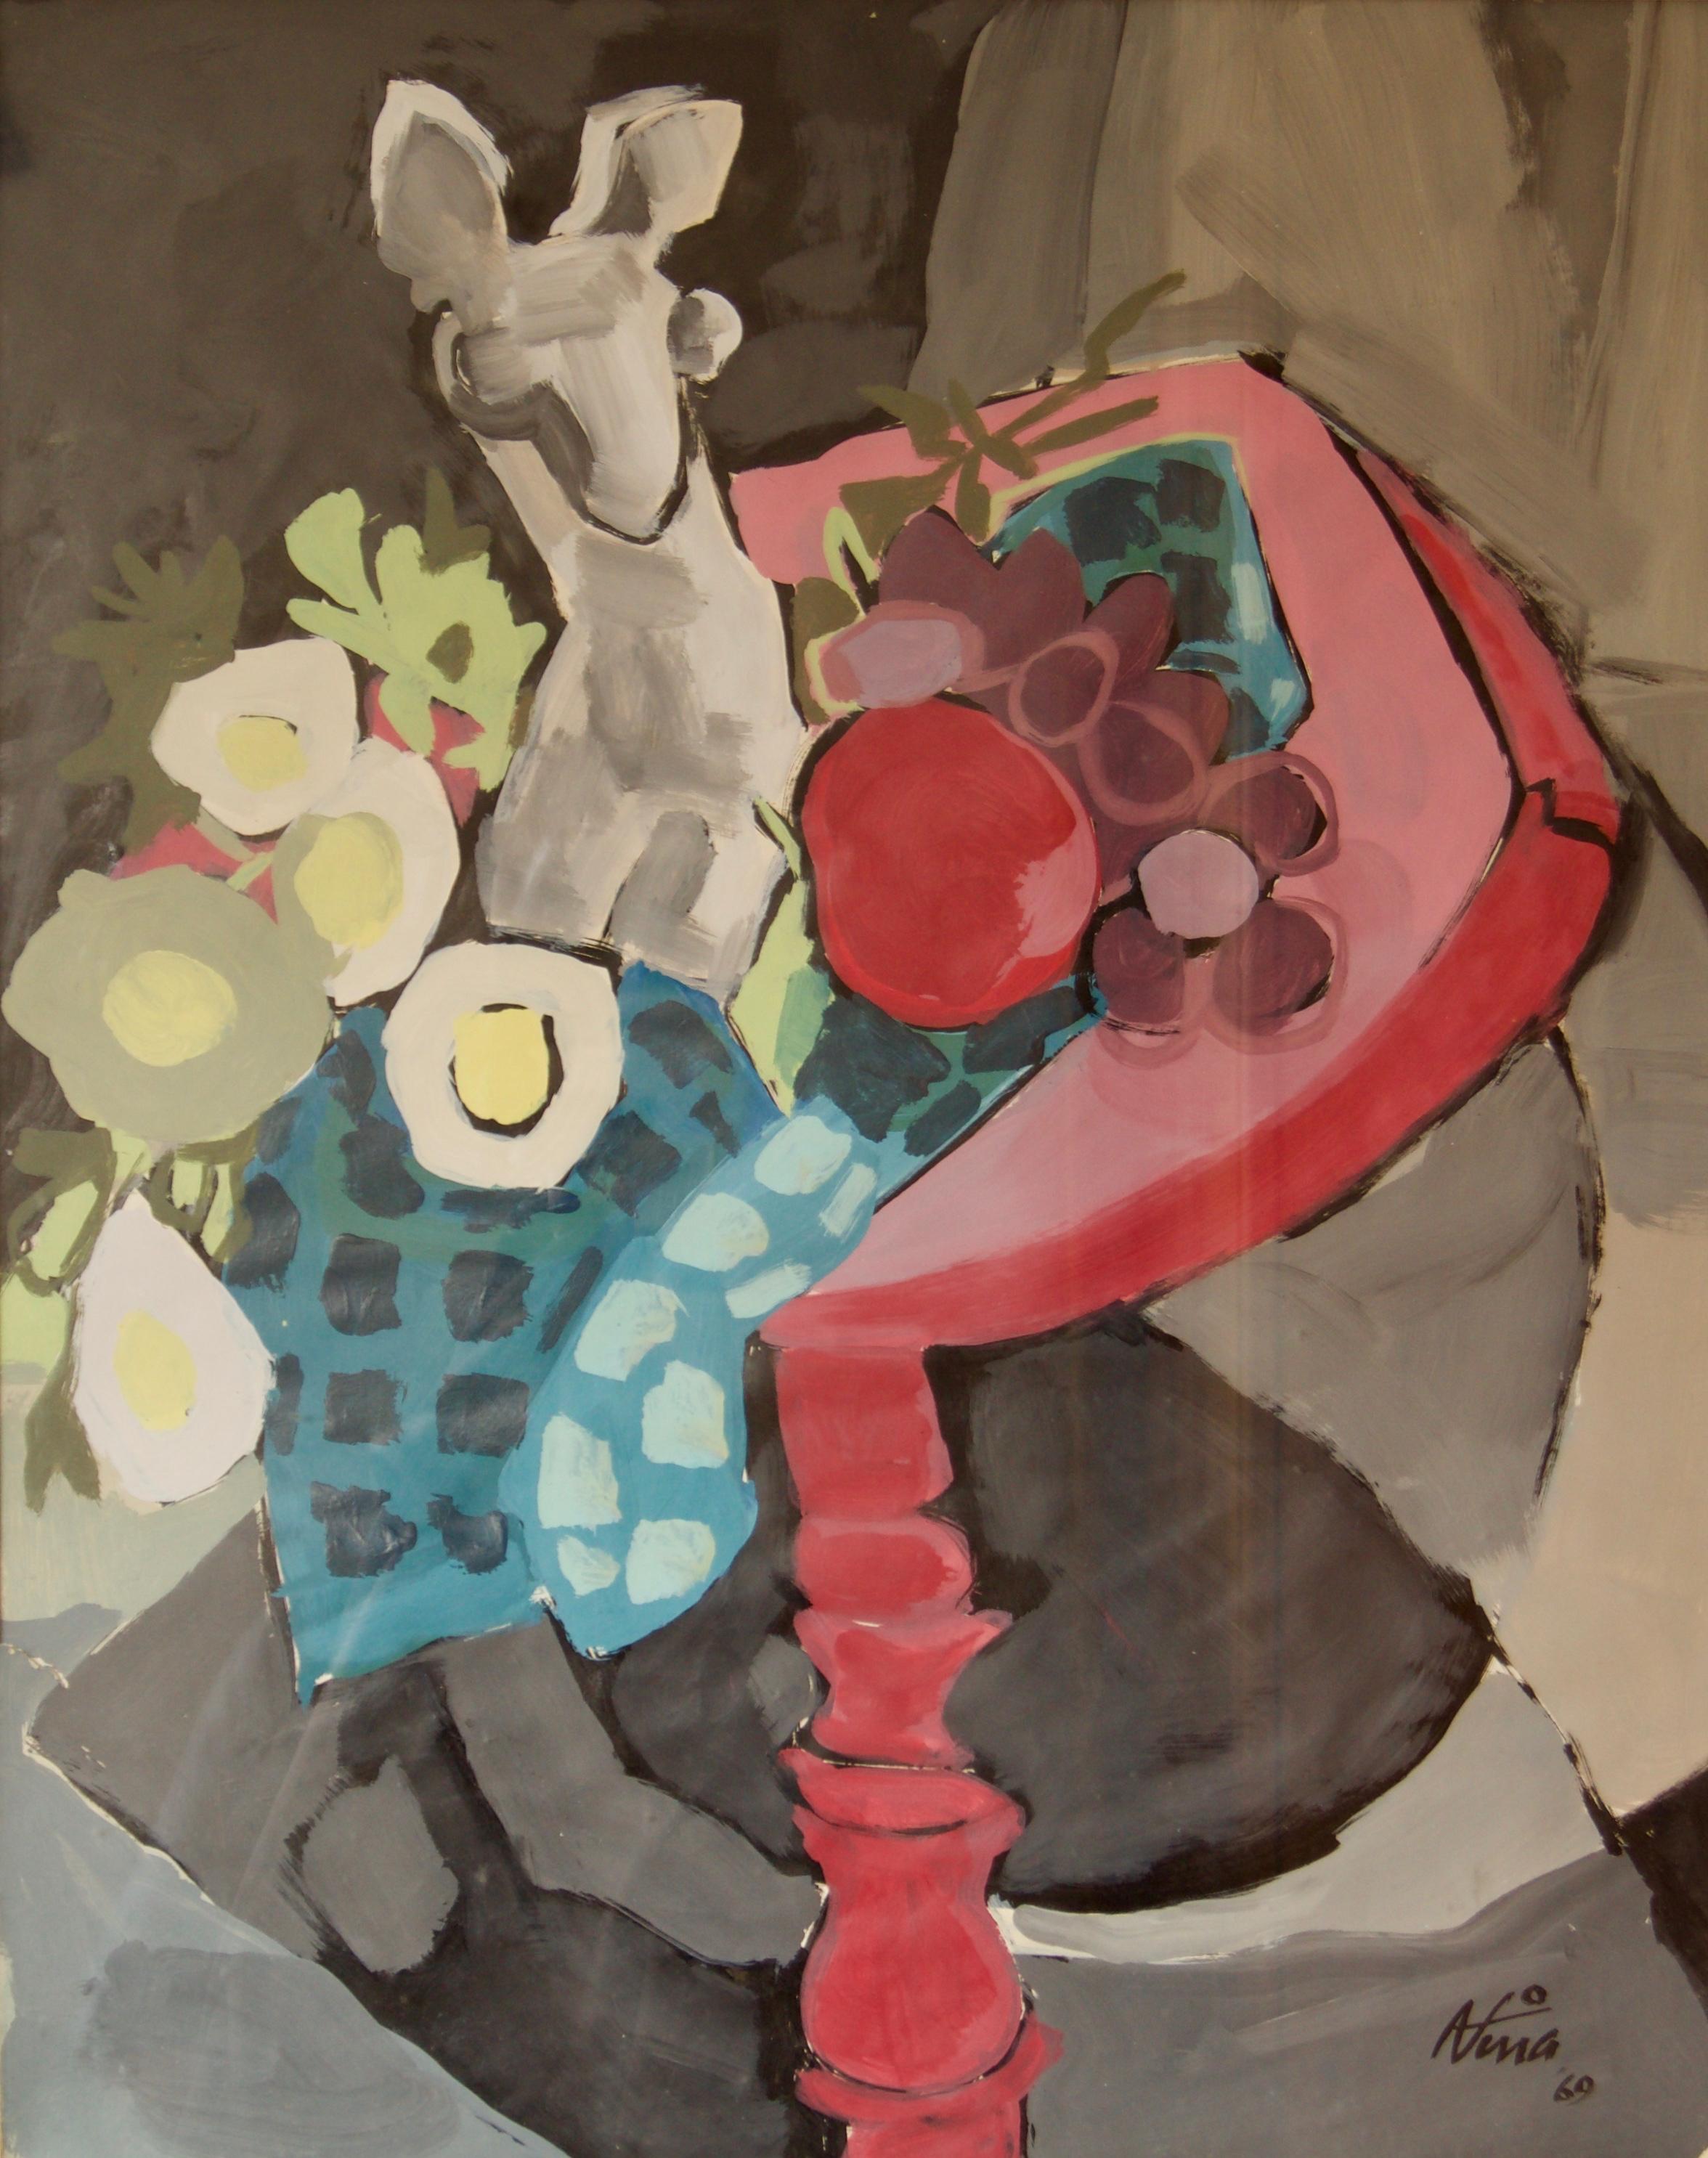 Nina - 1969

Watercolour in a wooden frame under glass

Keywords: abstract, vase, table, tablecloth, still life, fruit, apple, watercolor, red, animal, eggs, blue, flowers.